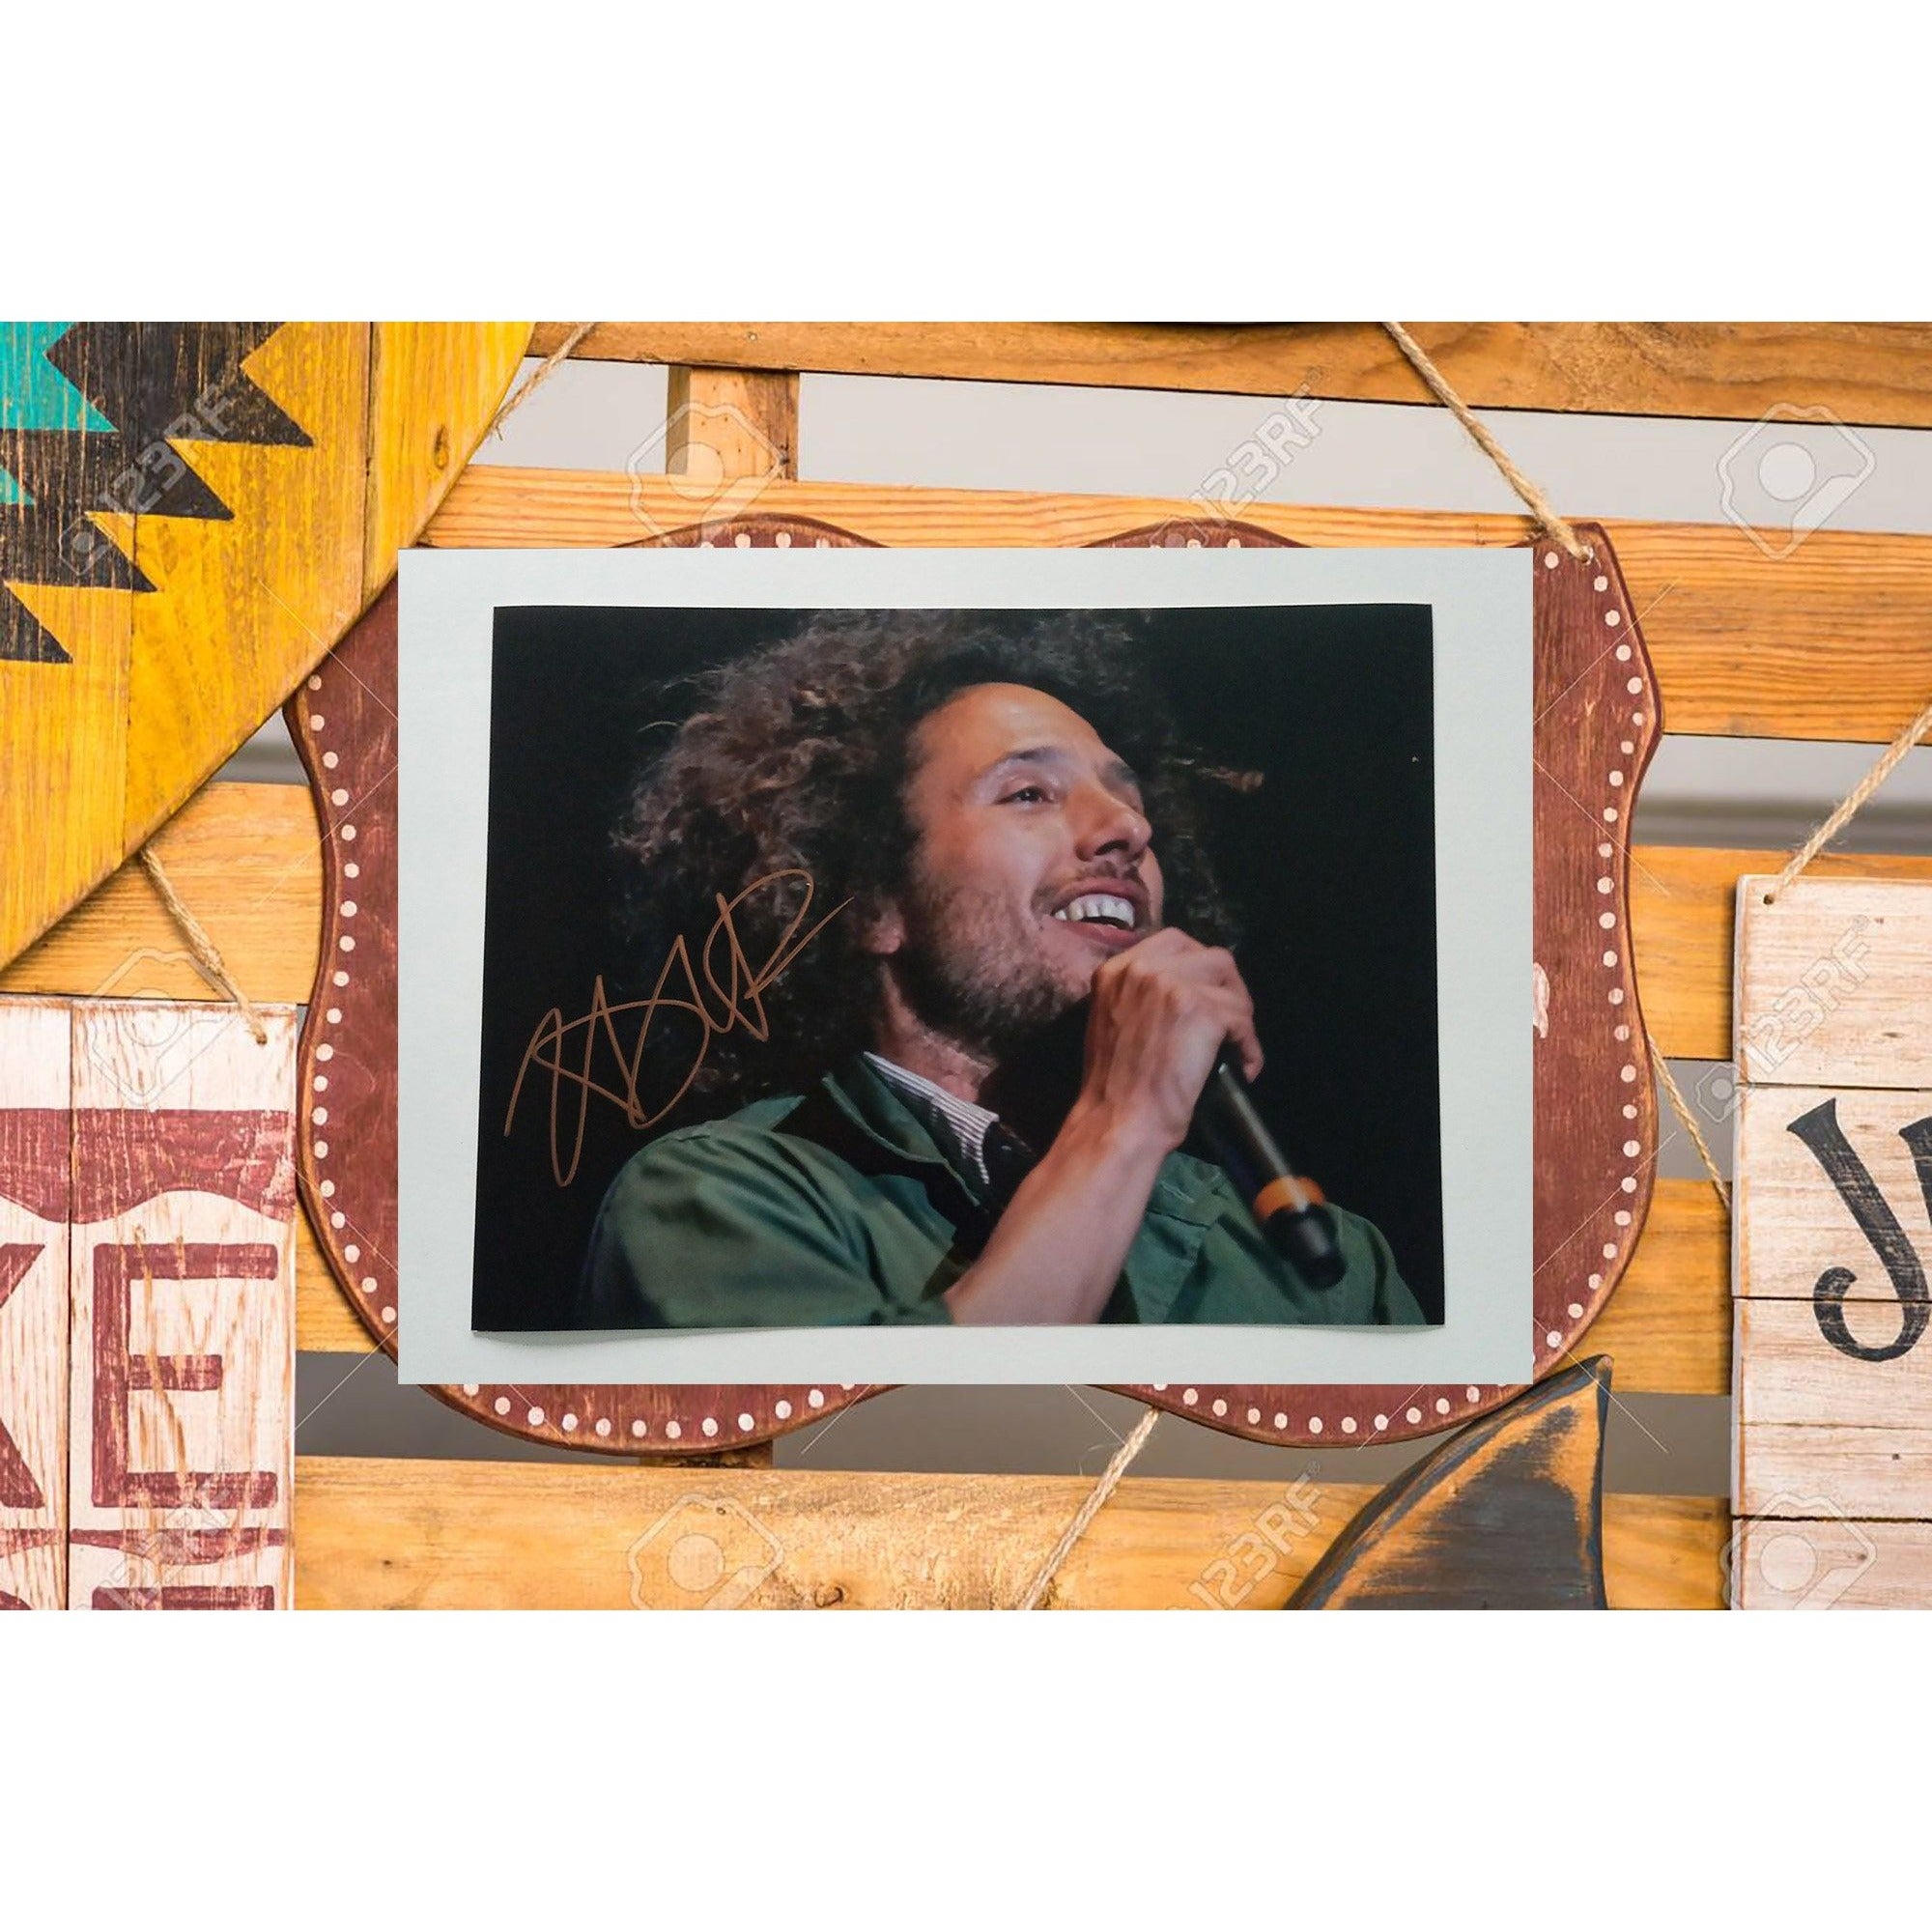 Zack de la Rocha Rage Against the Machine 8 by 10 signed photo with proof